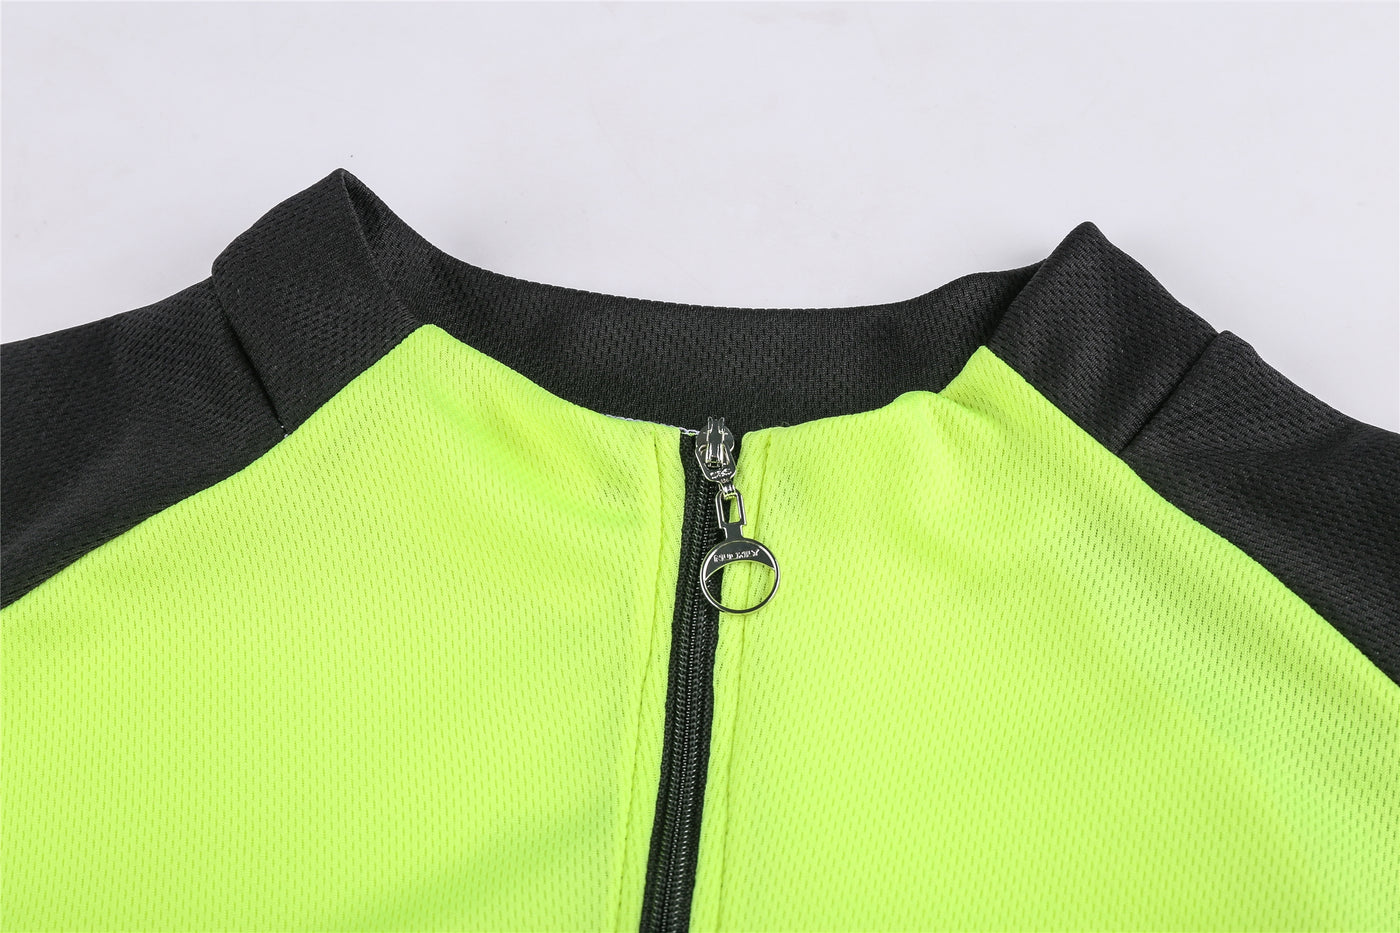 Nuckily MH023 Mens Cycling Jersey (Neon Green)